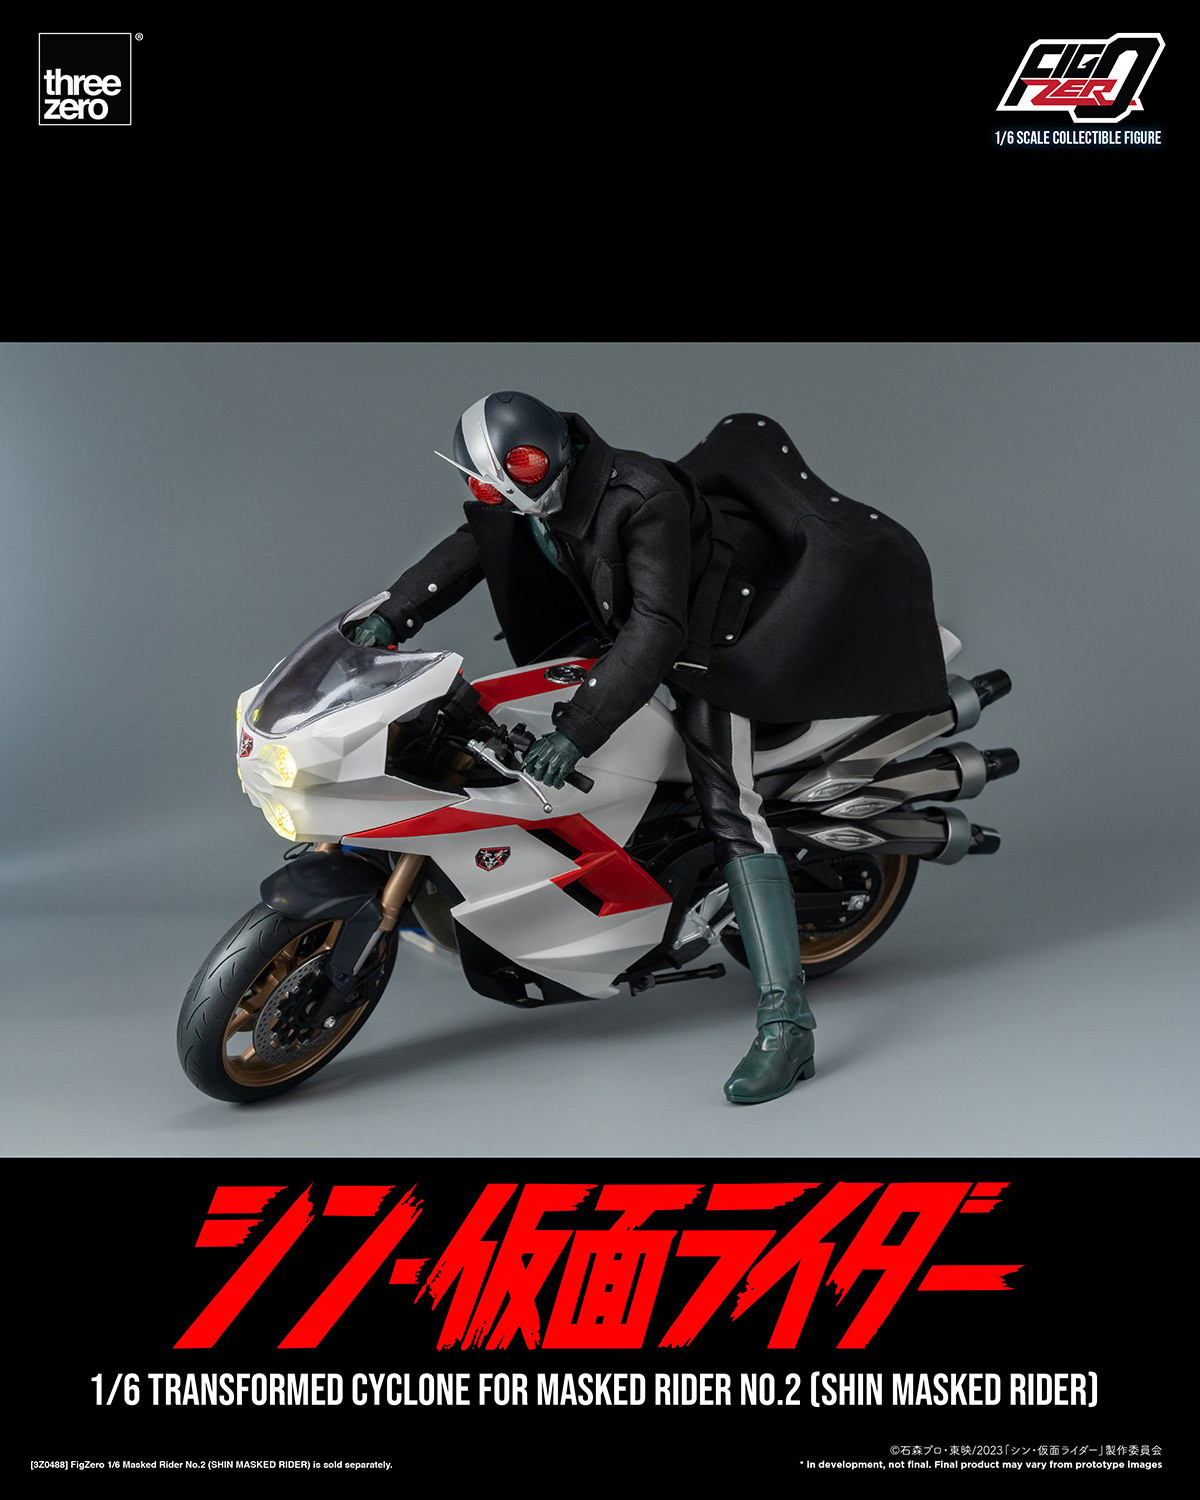 Transformed Cyclone for Masked Rider No. 2 (Shin Masked Rider) (Prototype Shown) View 15